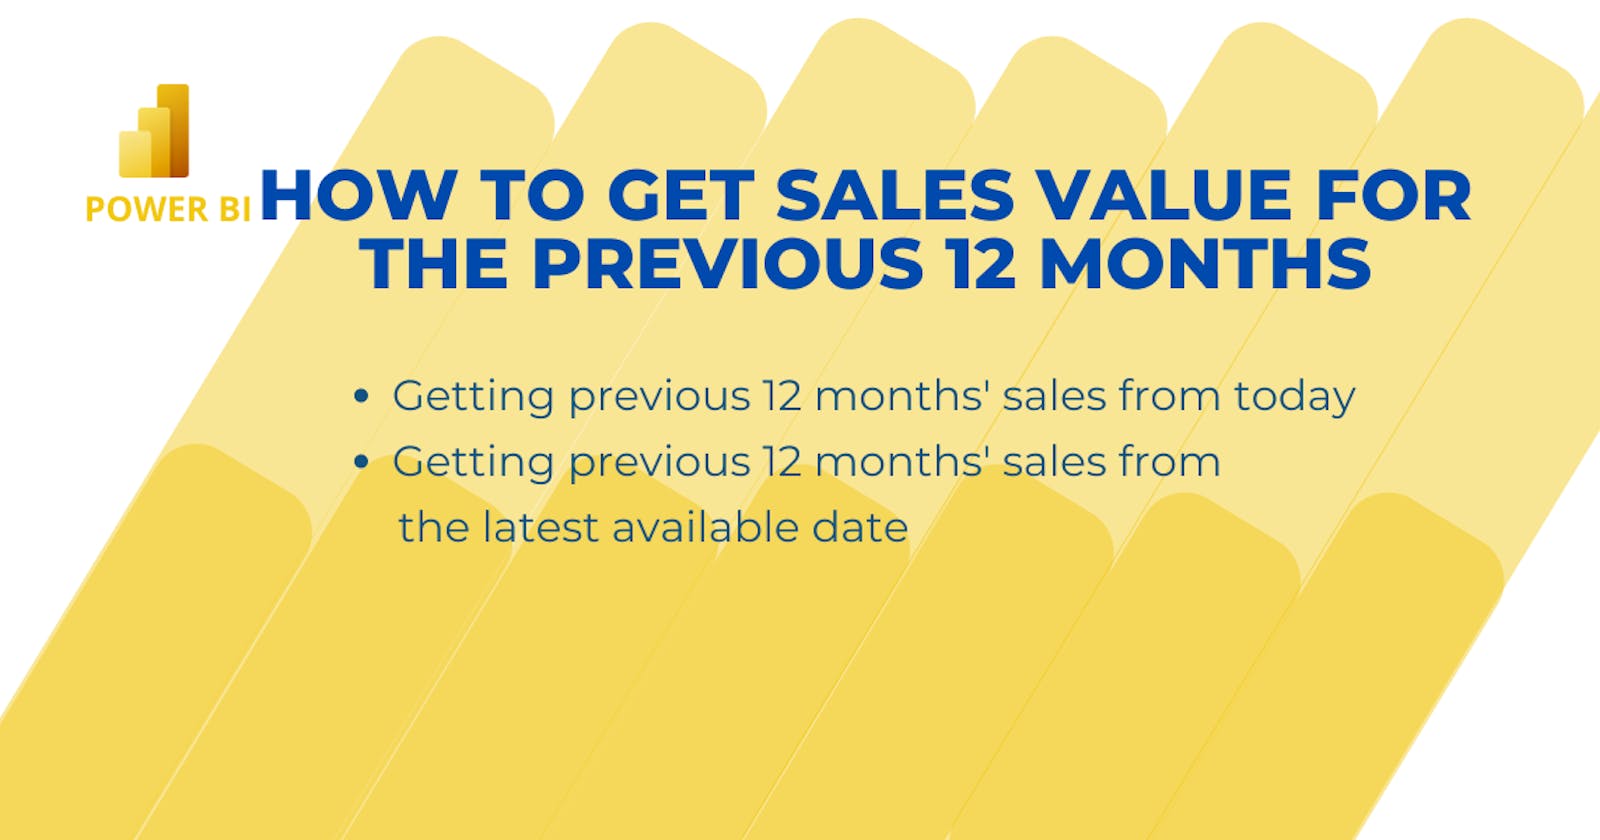 How to get sales value for the previous 12 months from the latest available date in Power BI.